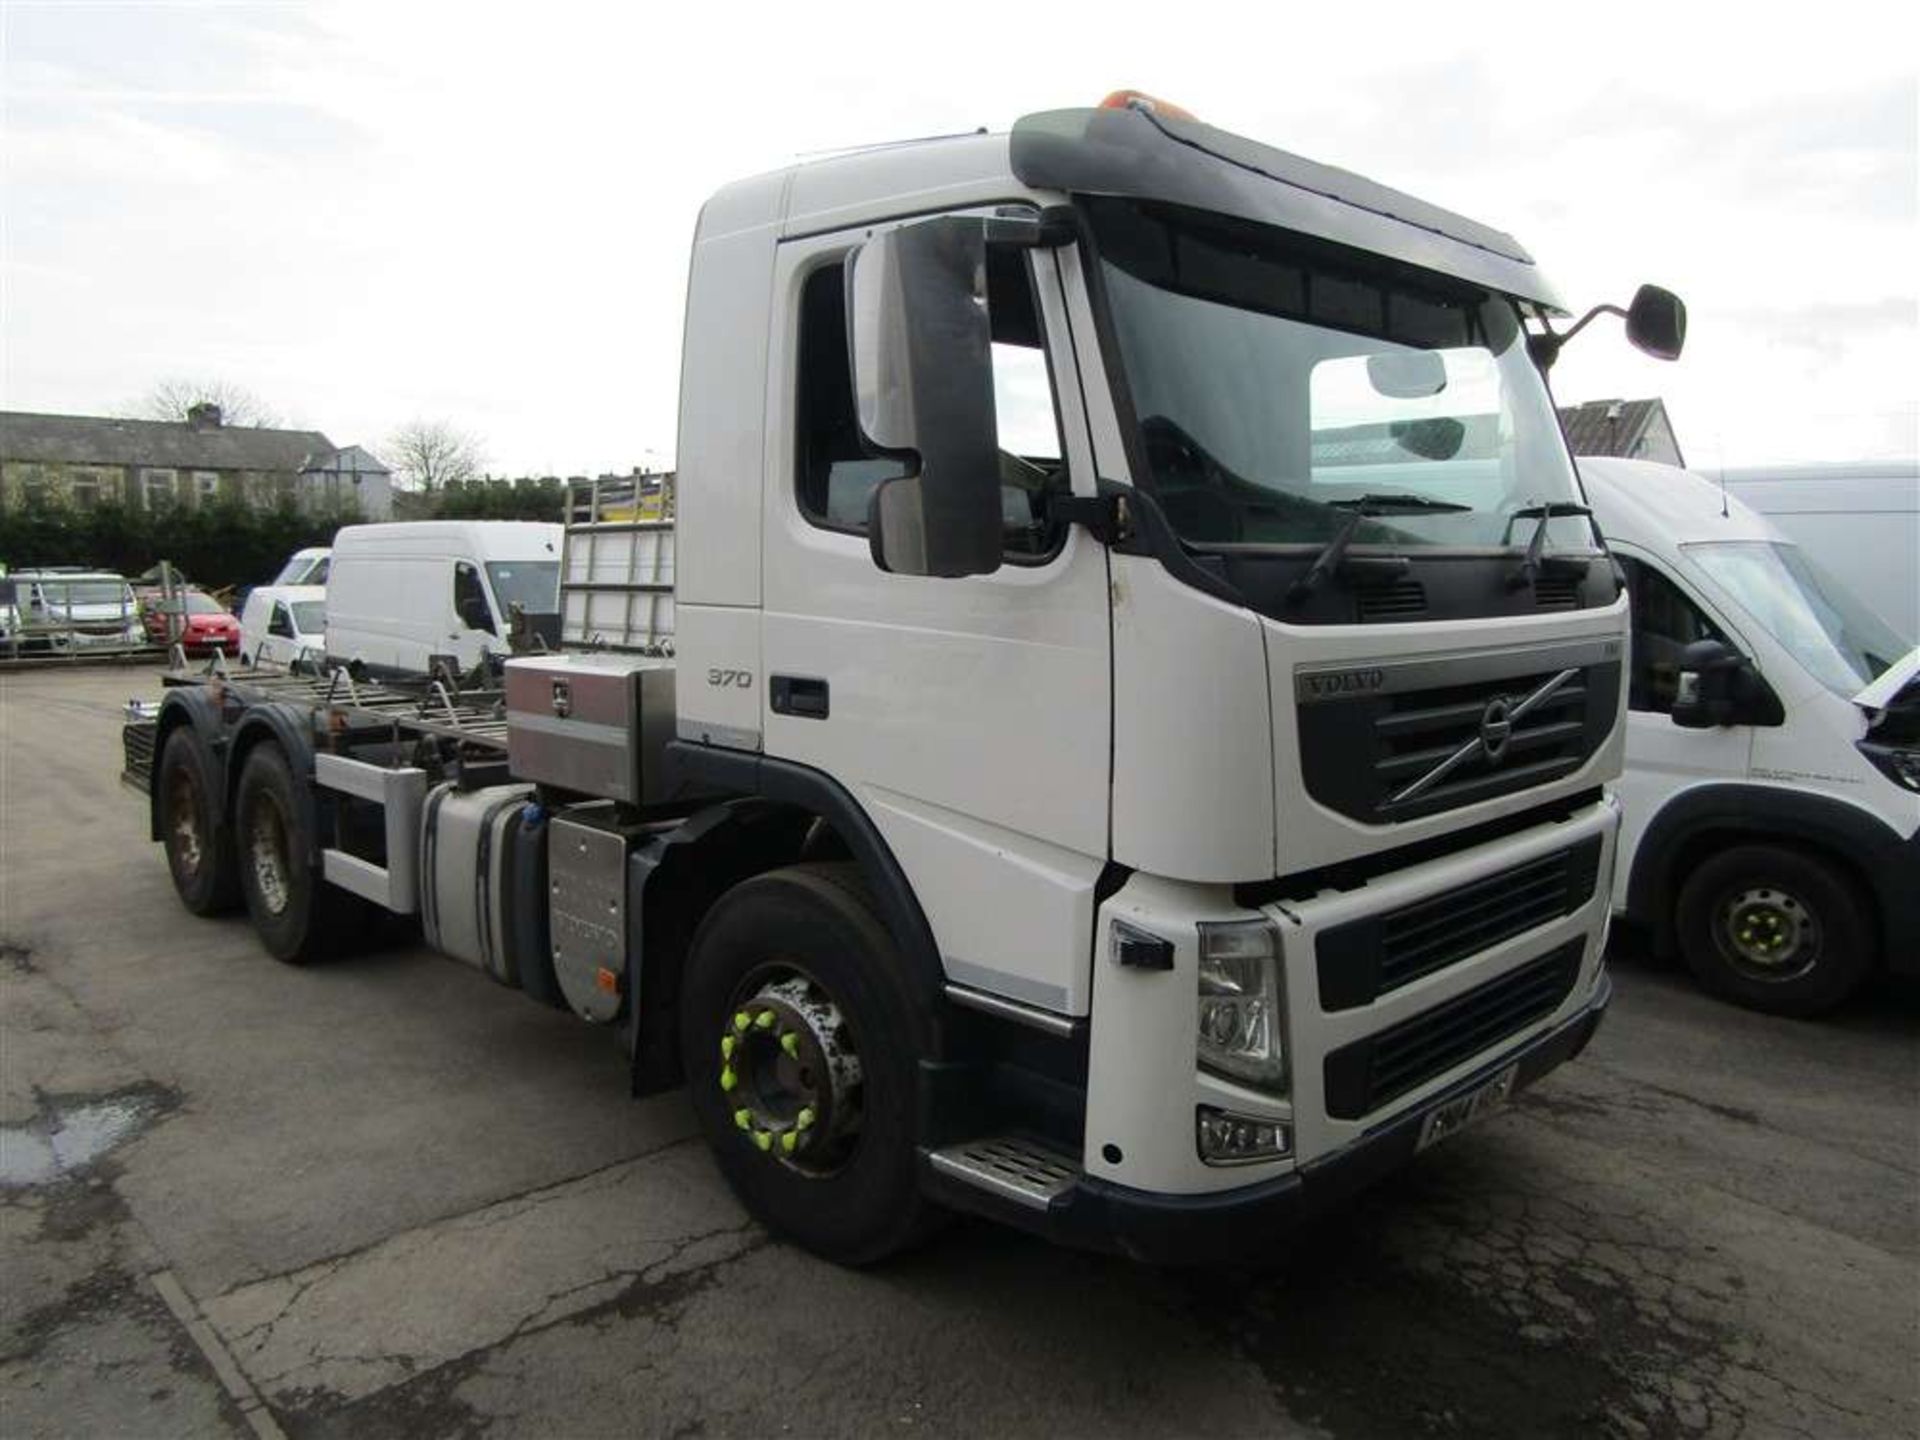 2014 14 reg Volvo FM 6 Wheel Chassis Cab (Direct United Utilities Water)